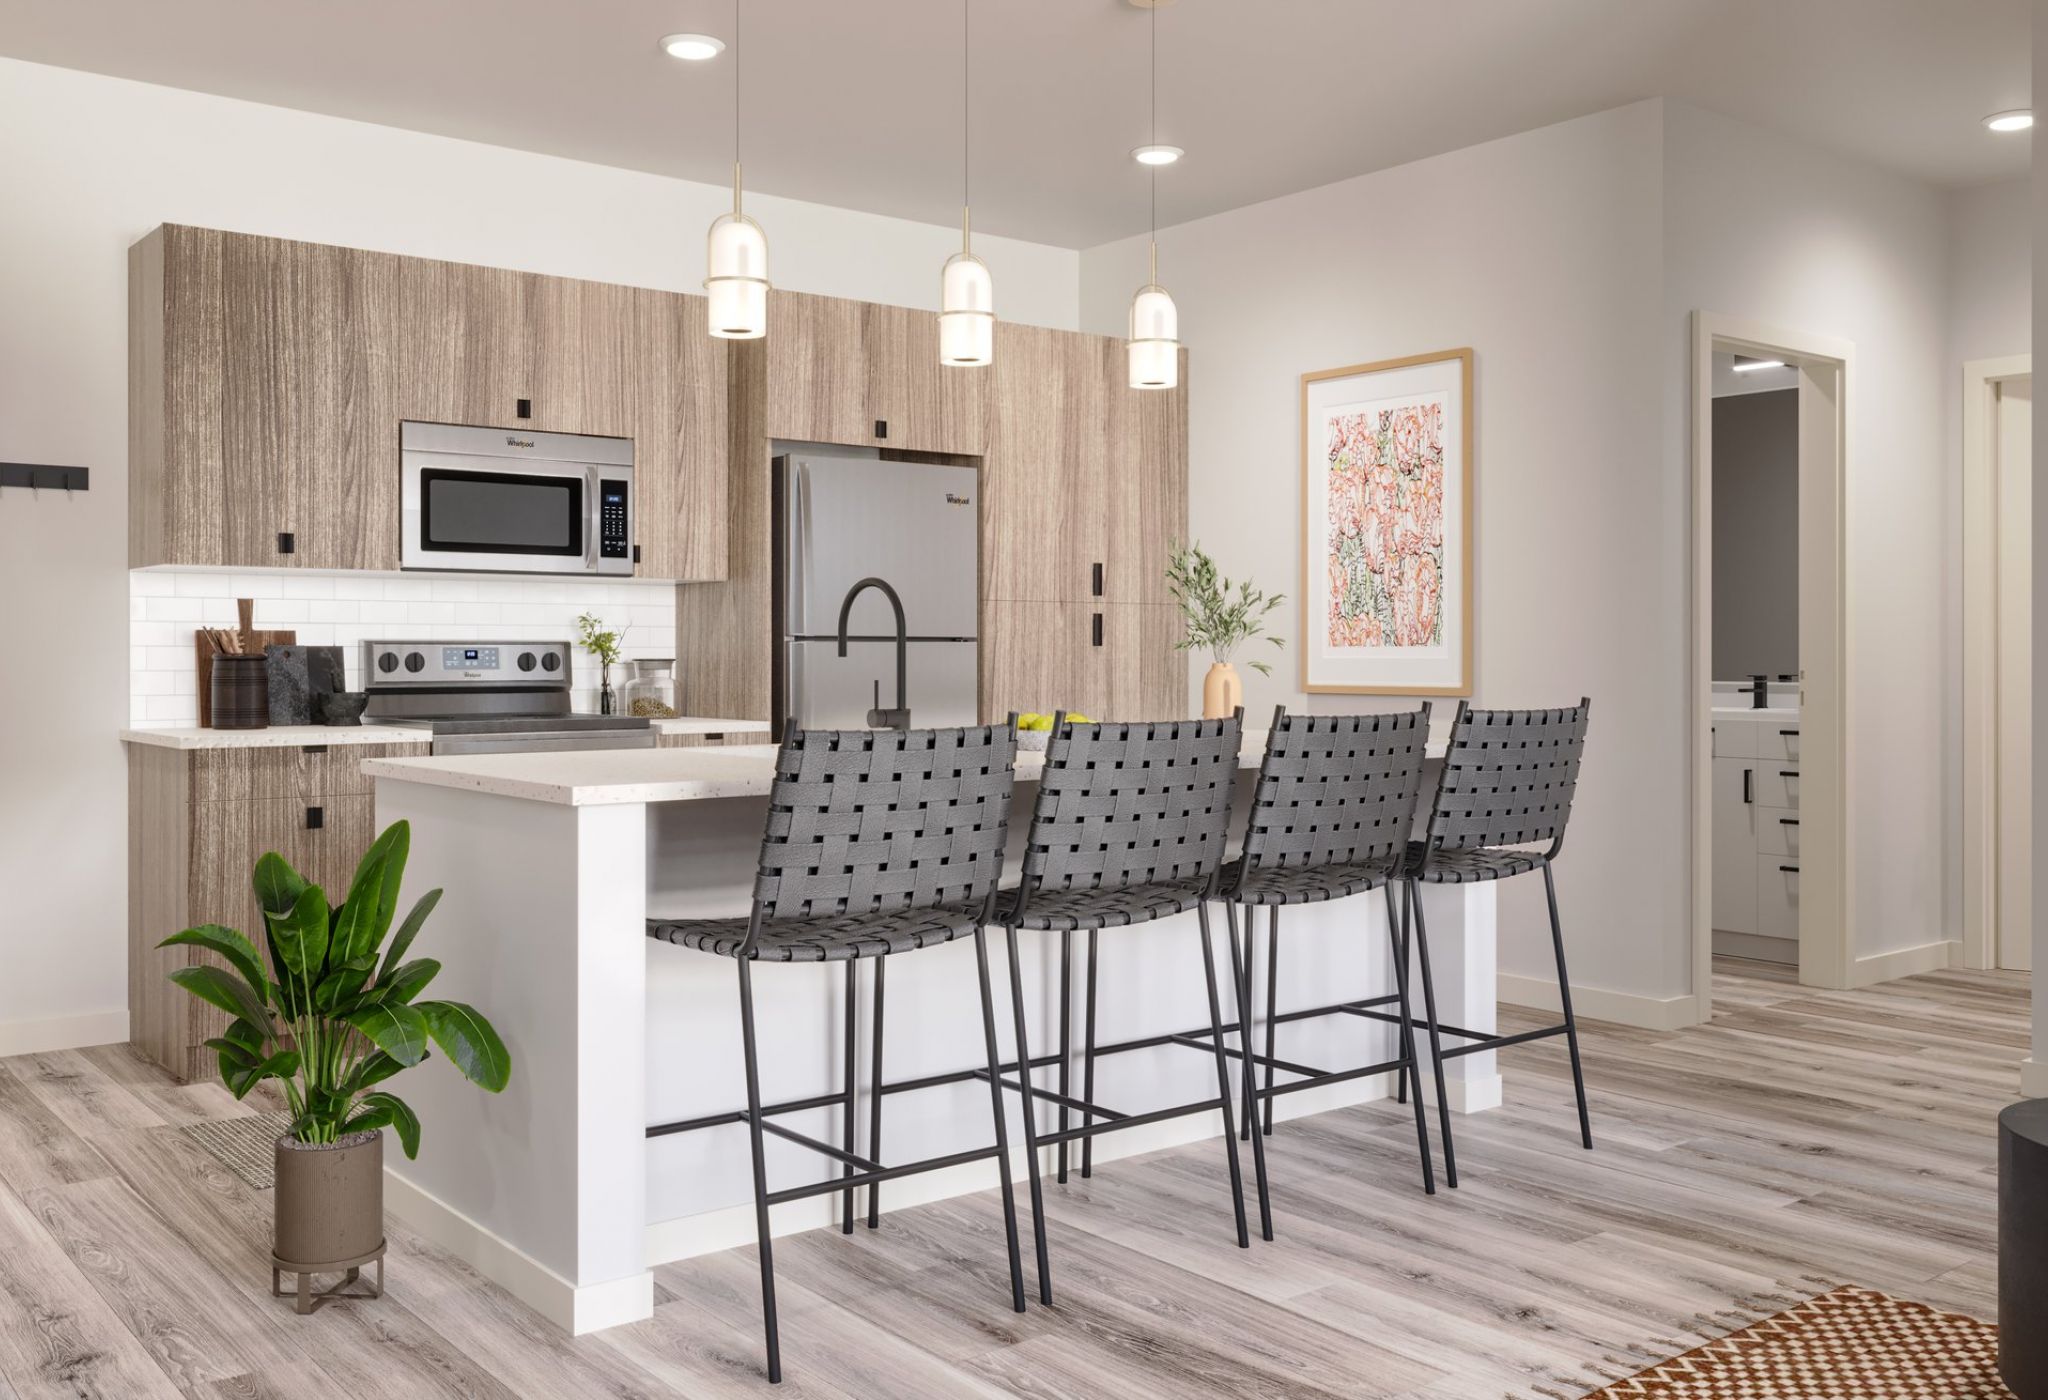 Rendering of VERVE West Lafayette student apartment kitchen with kitchen island and designer cabinetry